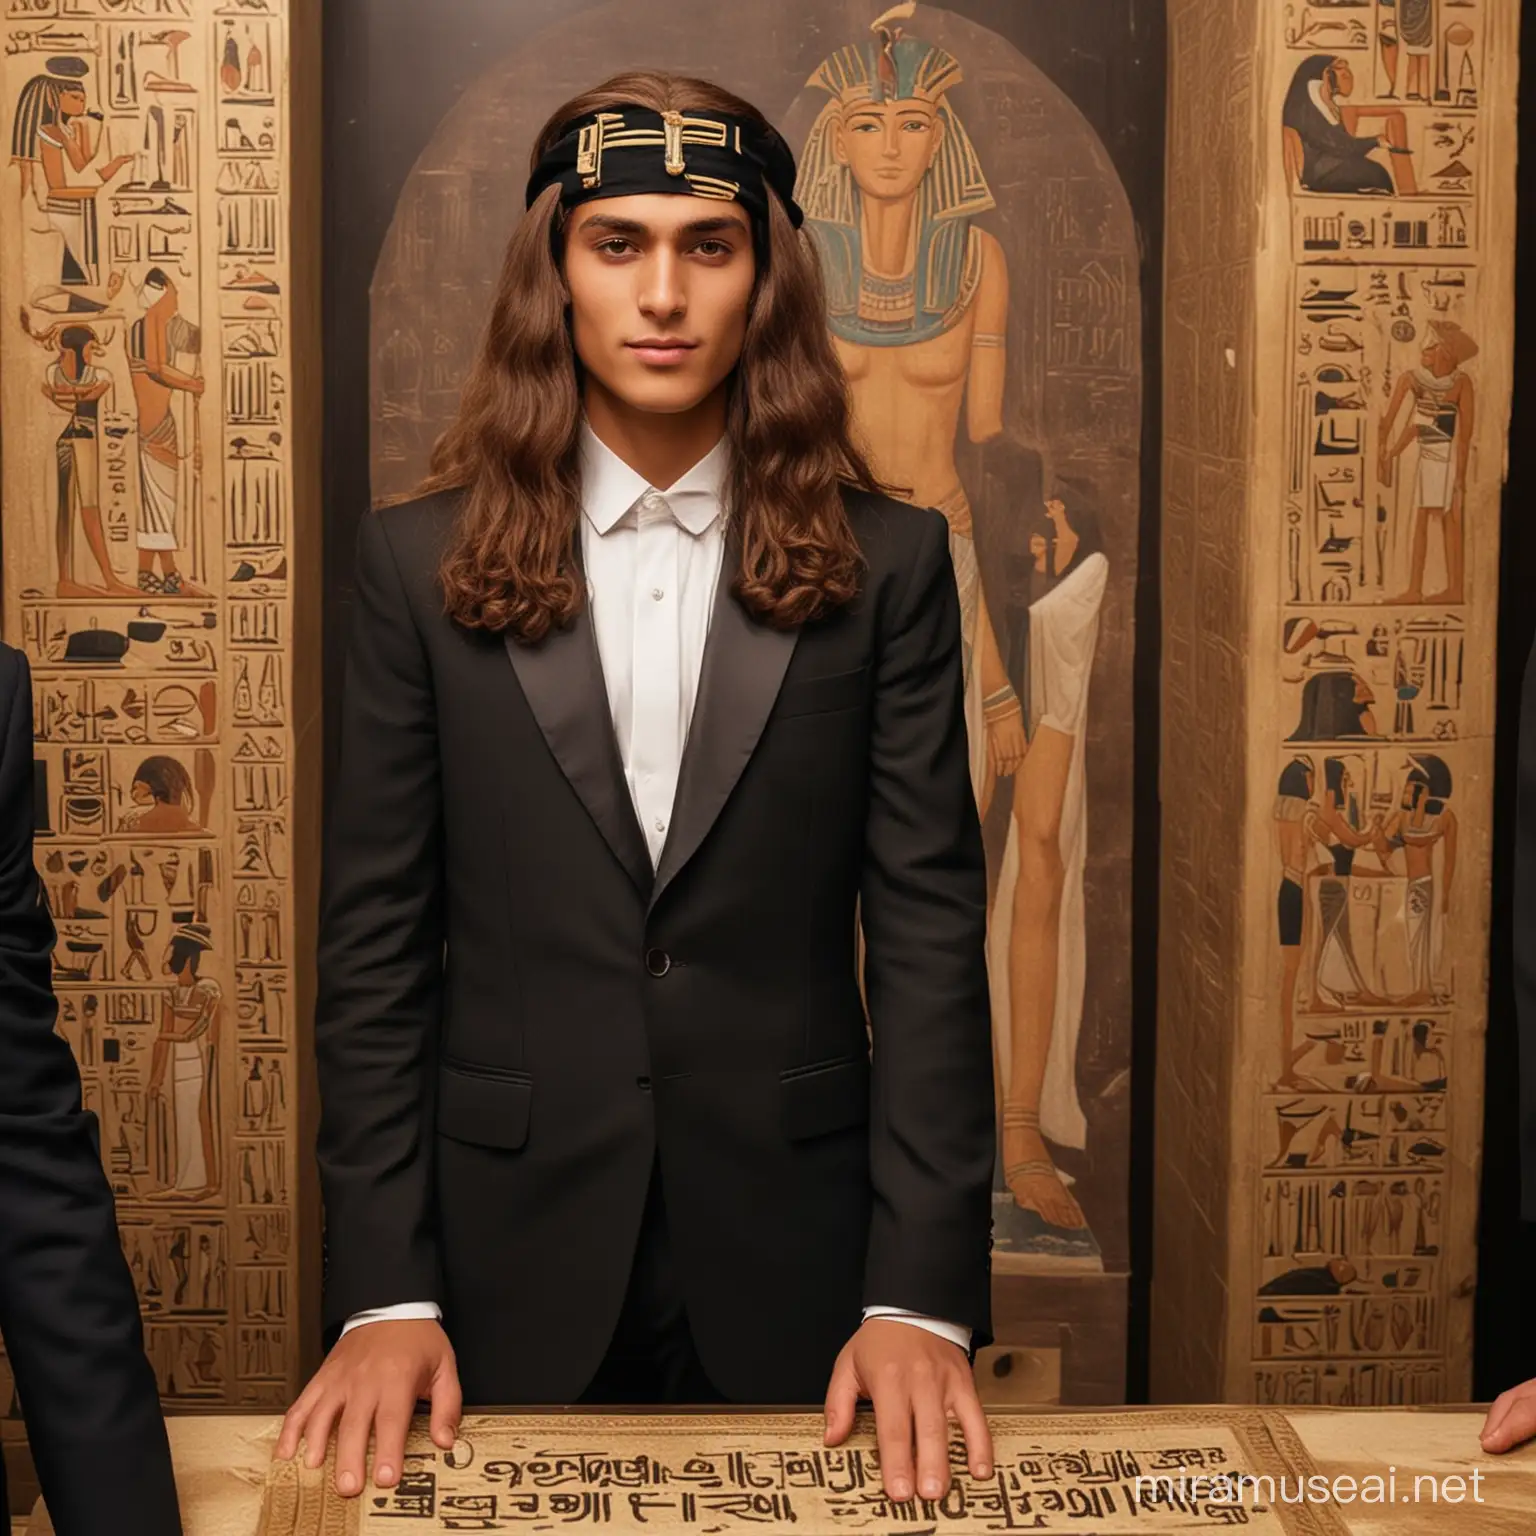 The son of Pharaoh Akhanaton has long hair at an official party, wearing formal clothes and a black suit, and behind him is the sign of Egyptian civilization.